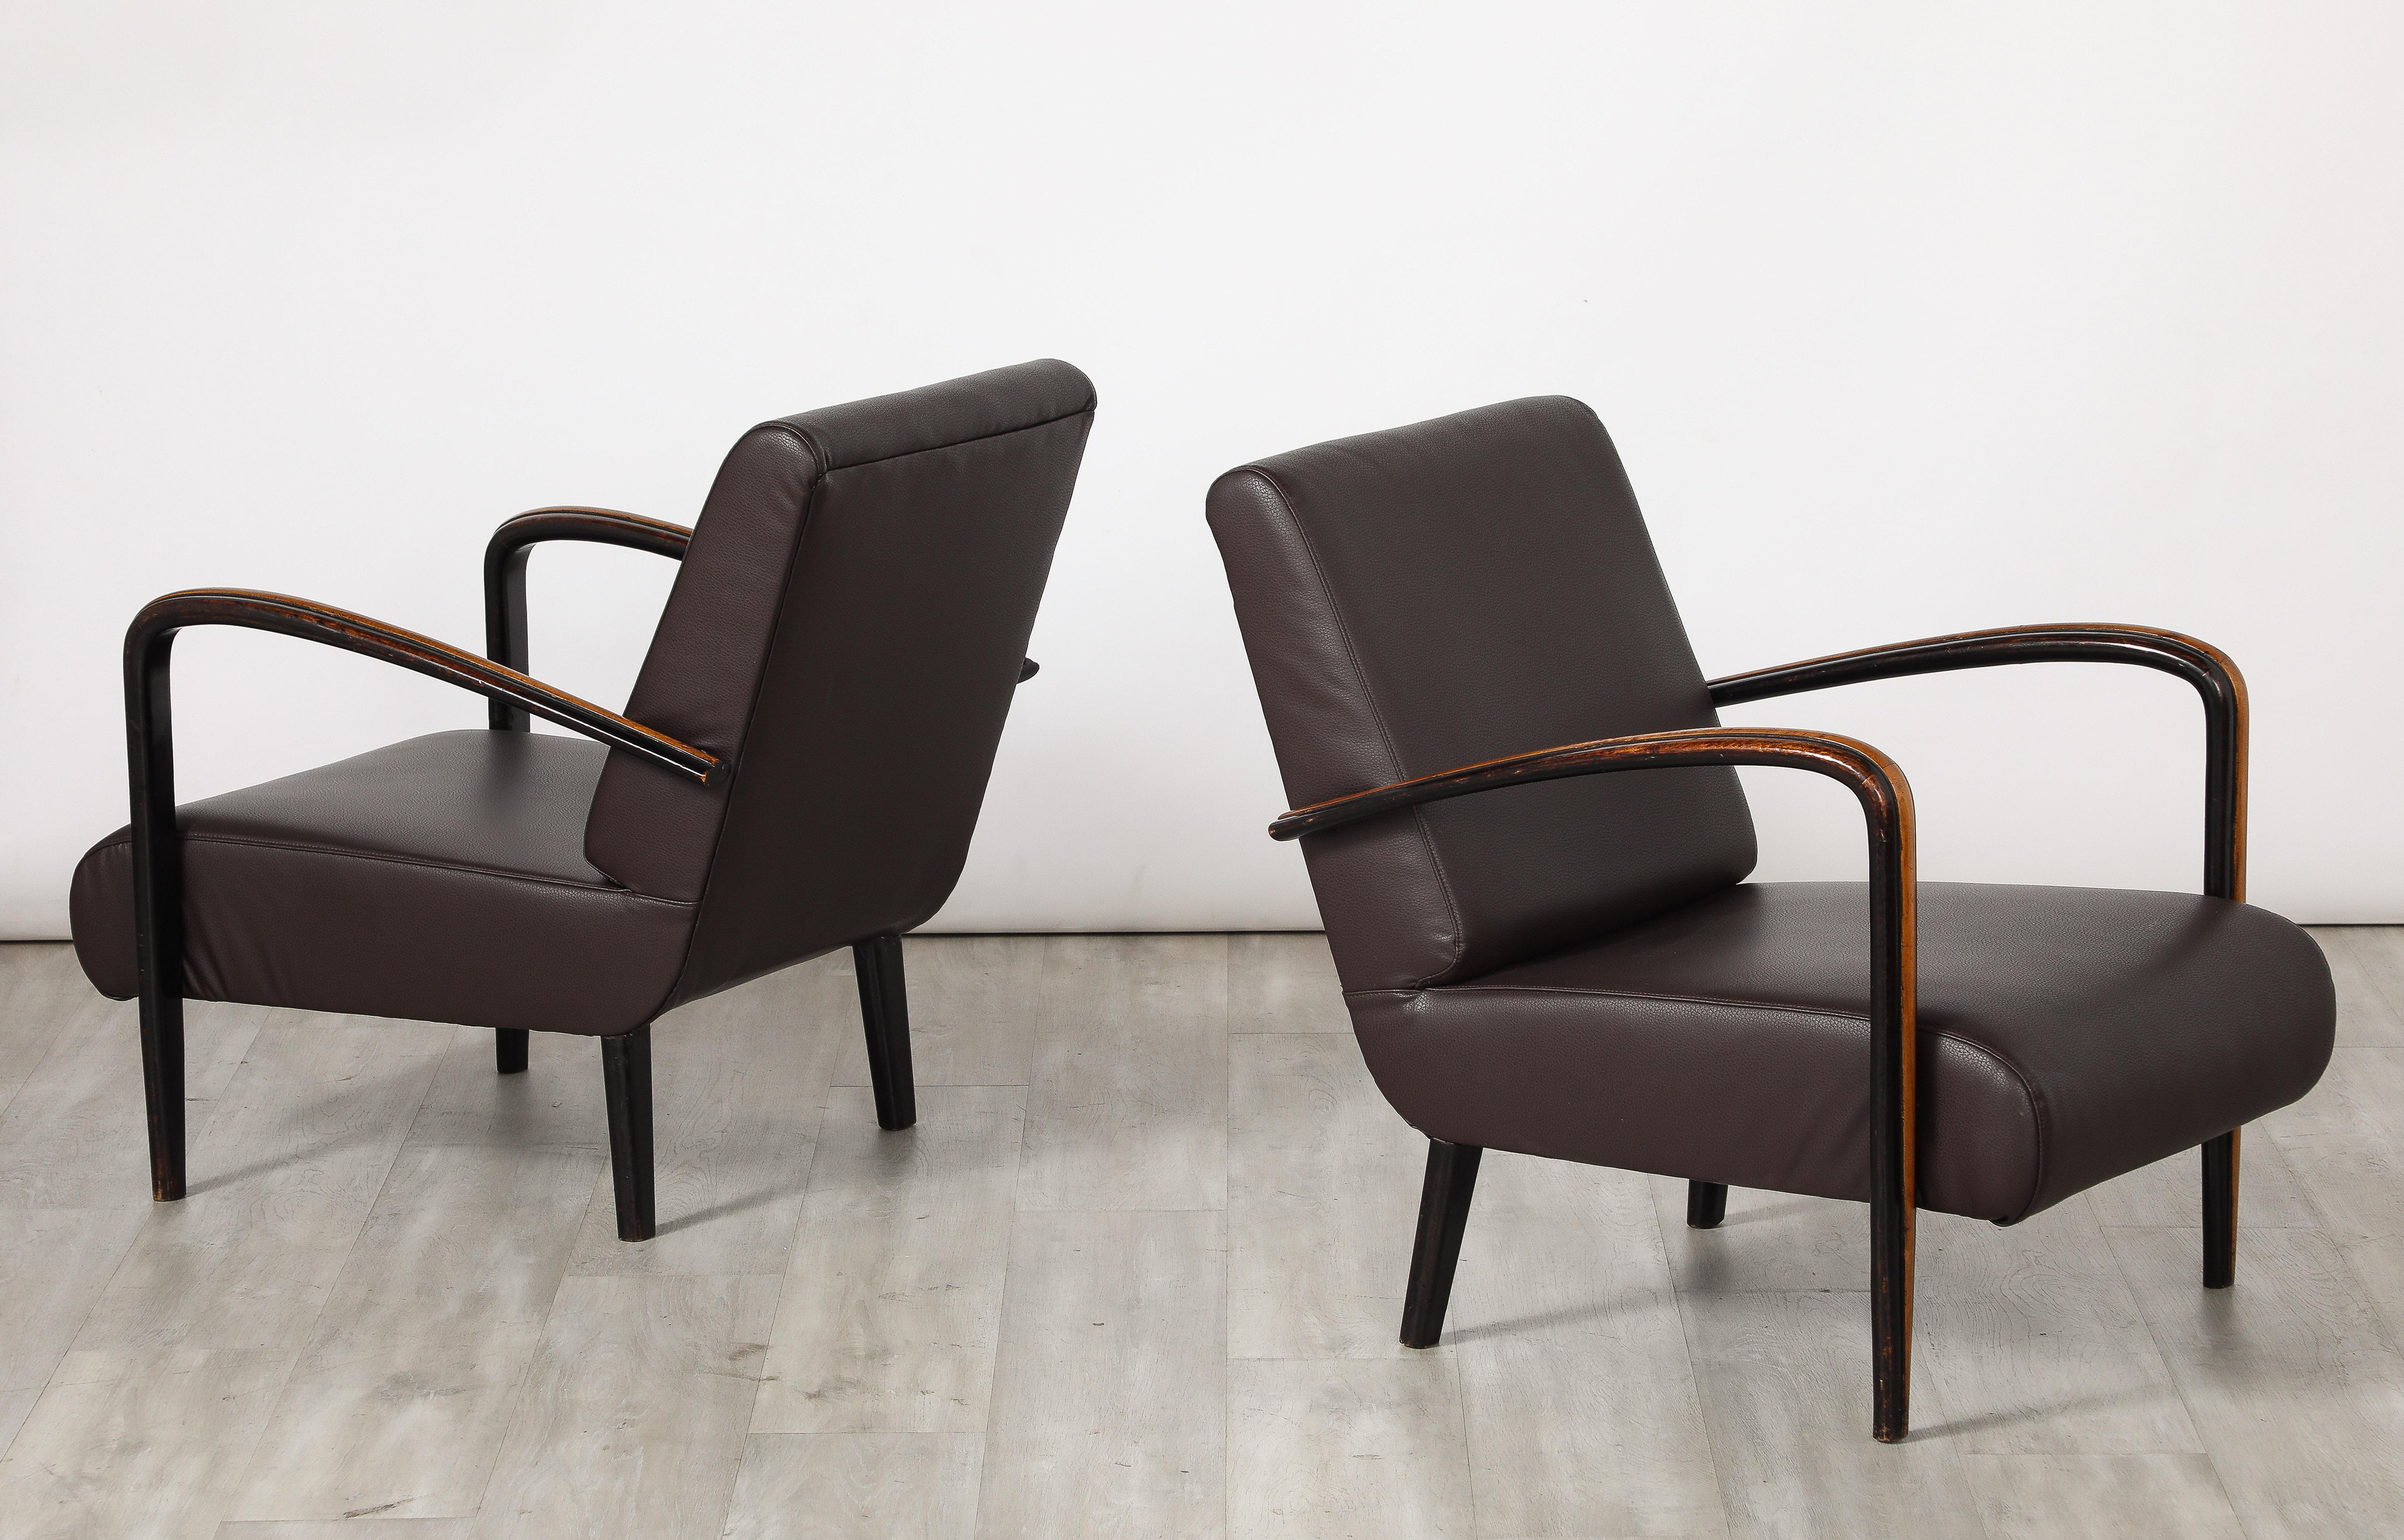 Pair of Italian Modernist Lounge Chairs, Italy, circa 1940 For Sale 4